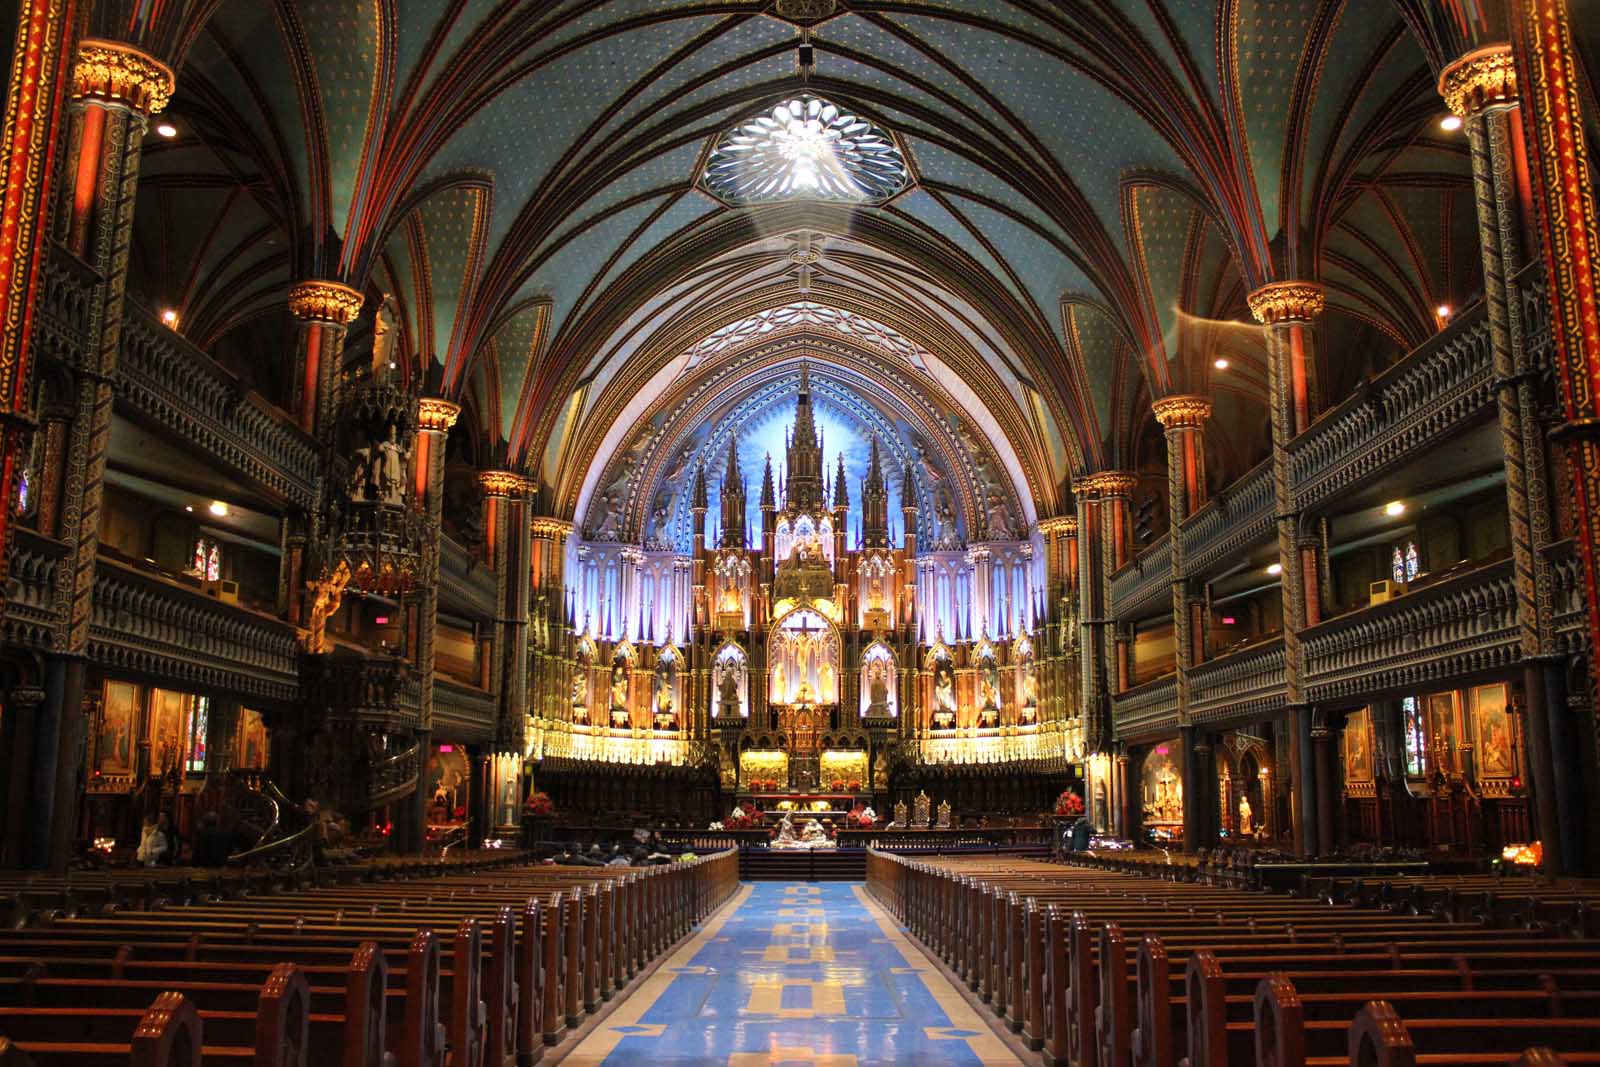 Things to do in Montreal Notre Dame Basilica